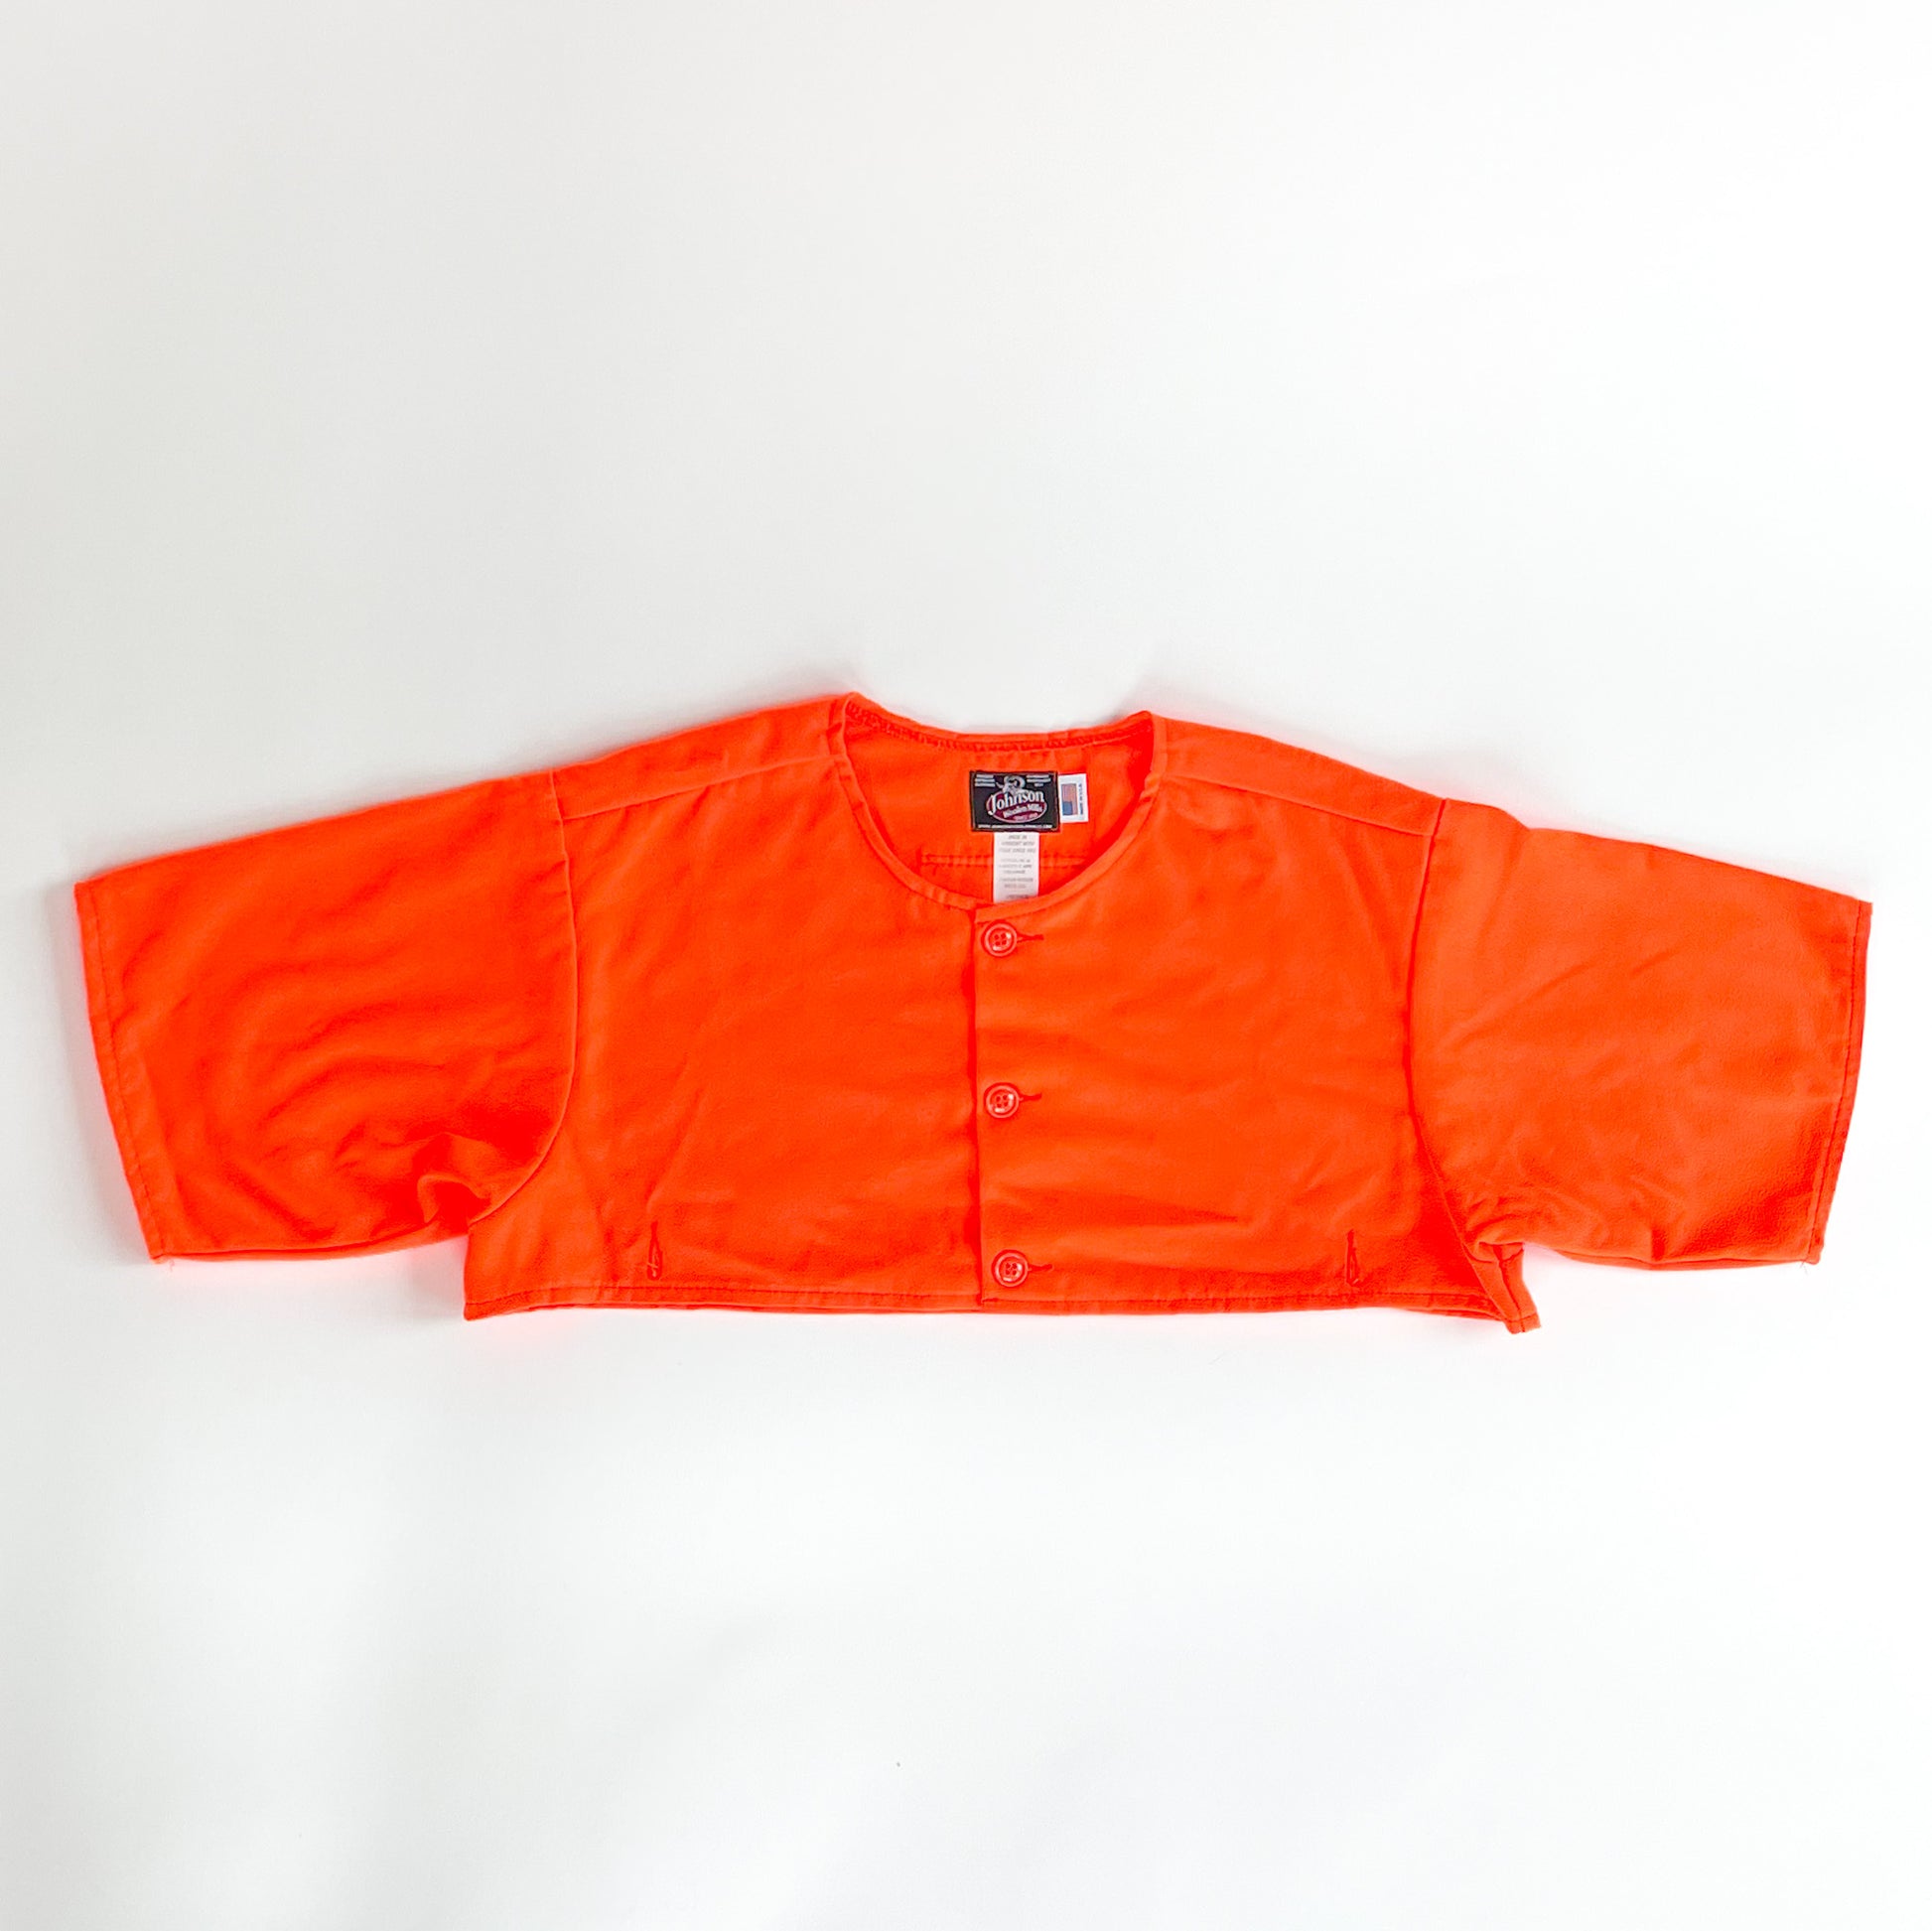 Blaze orange safety cape, designed to work over any Johnson Woolen Mills coat or jacket. Short sleeved, Blaze Orange with three button front & two bottom button holes